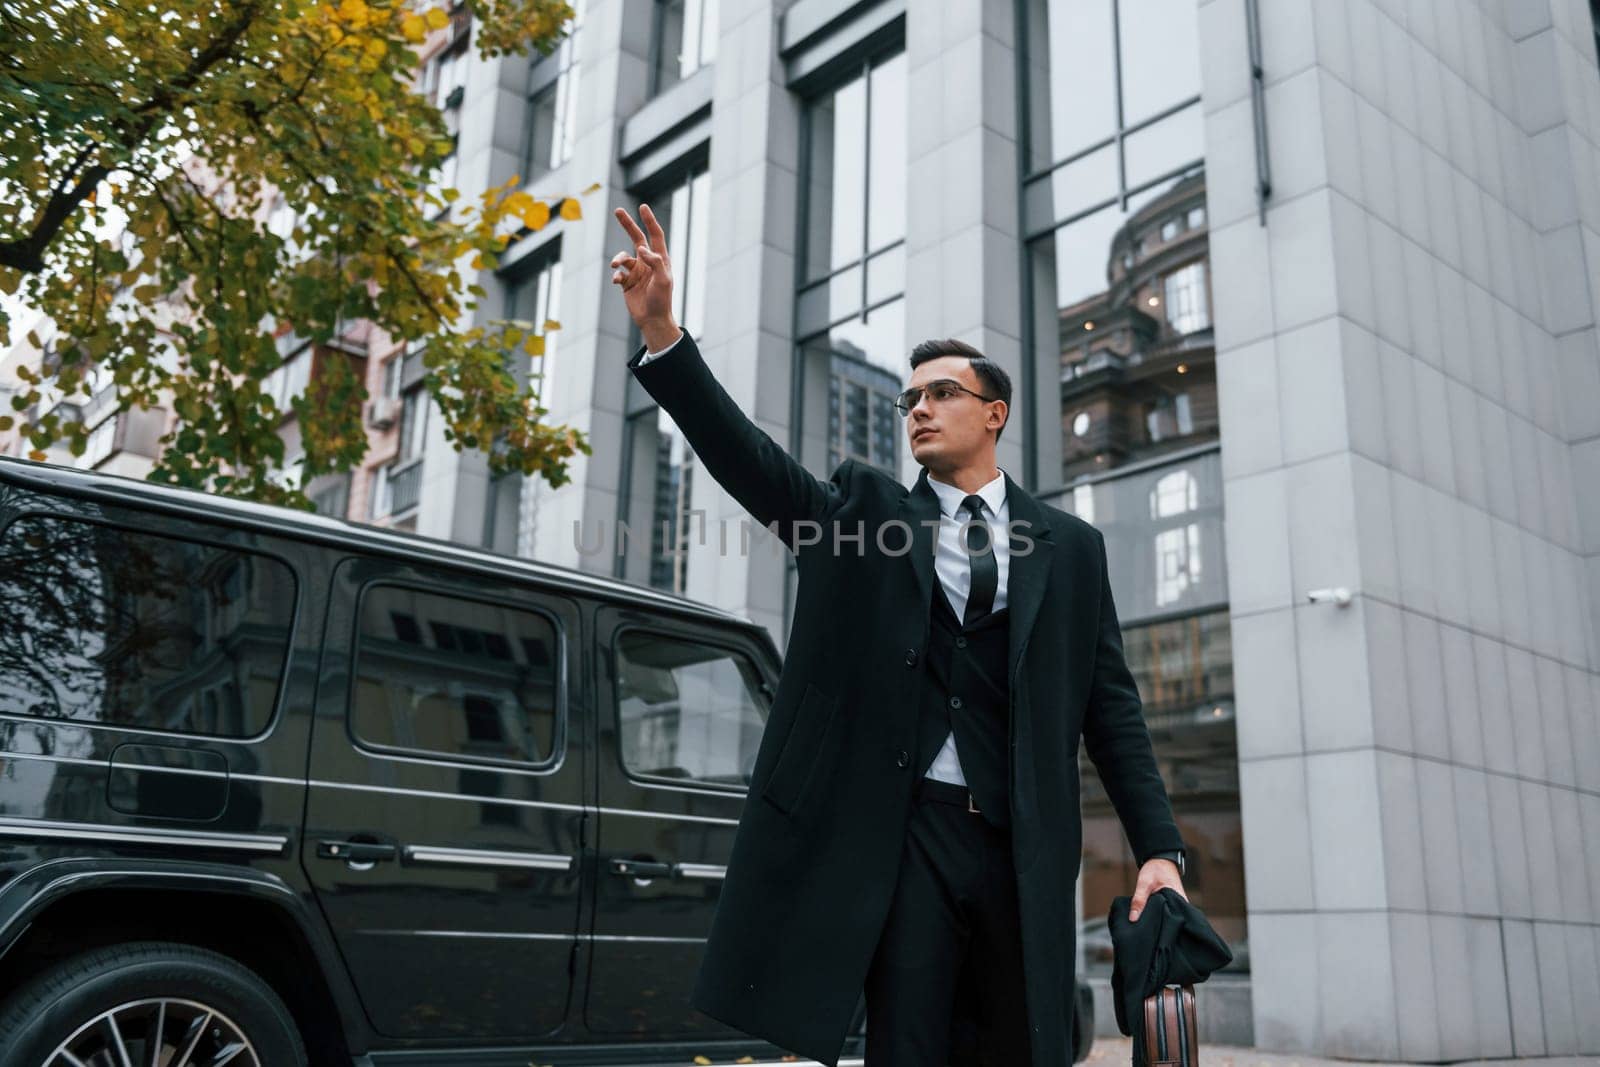 Standing against black car. Businessman in black suit and tie is outdoors in the city.